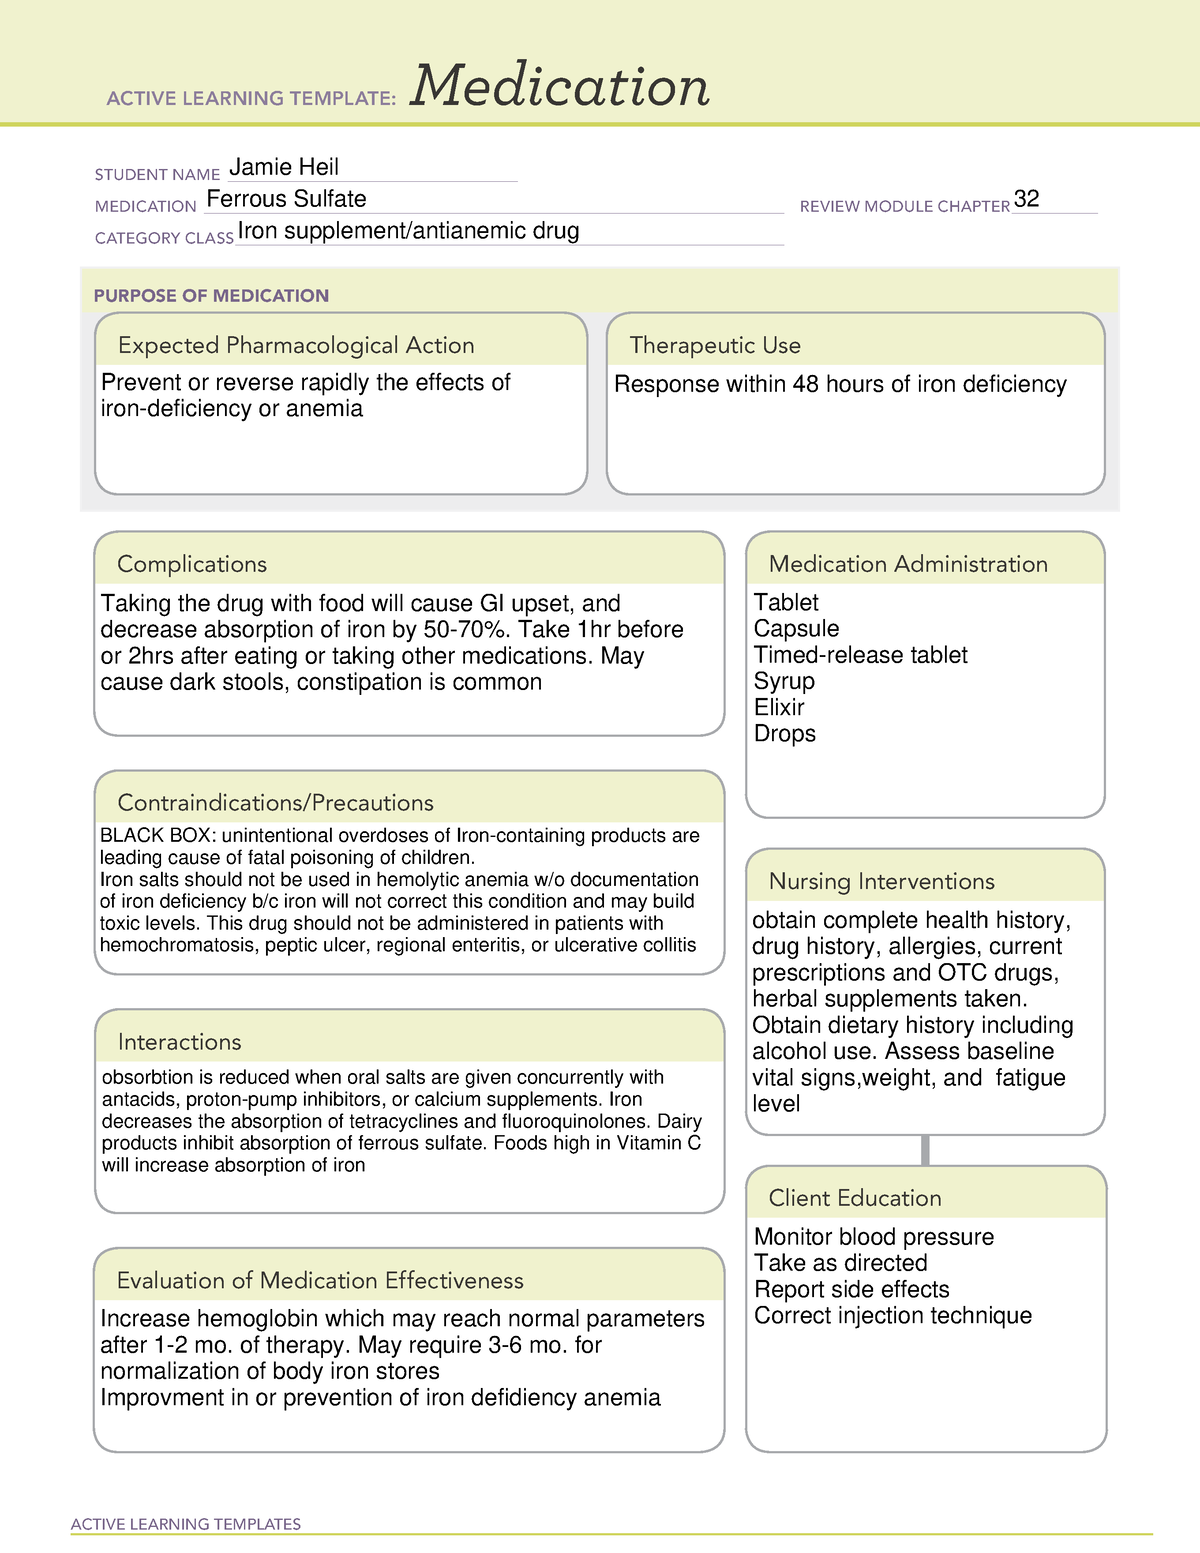 Ferrous Sulfate Medication Card ACTIVE LEARNING TEMPLATES 